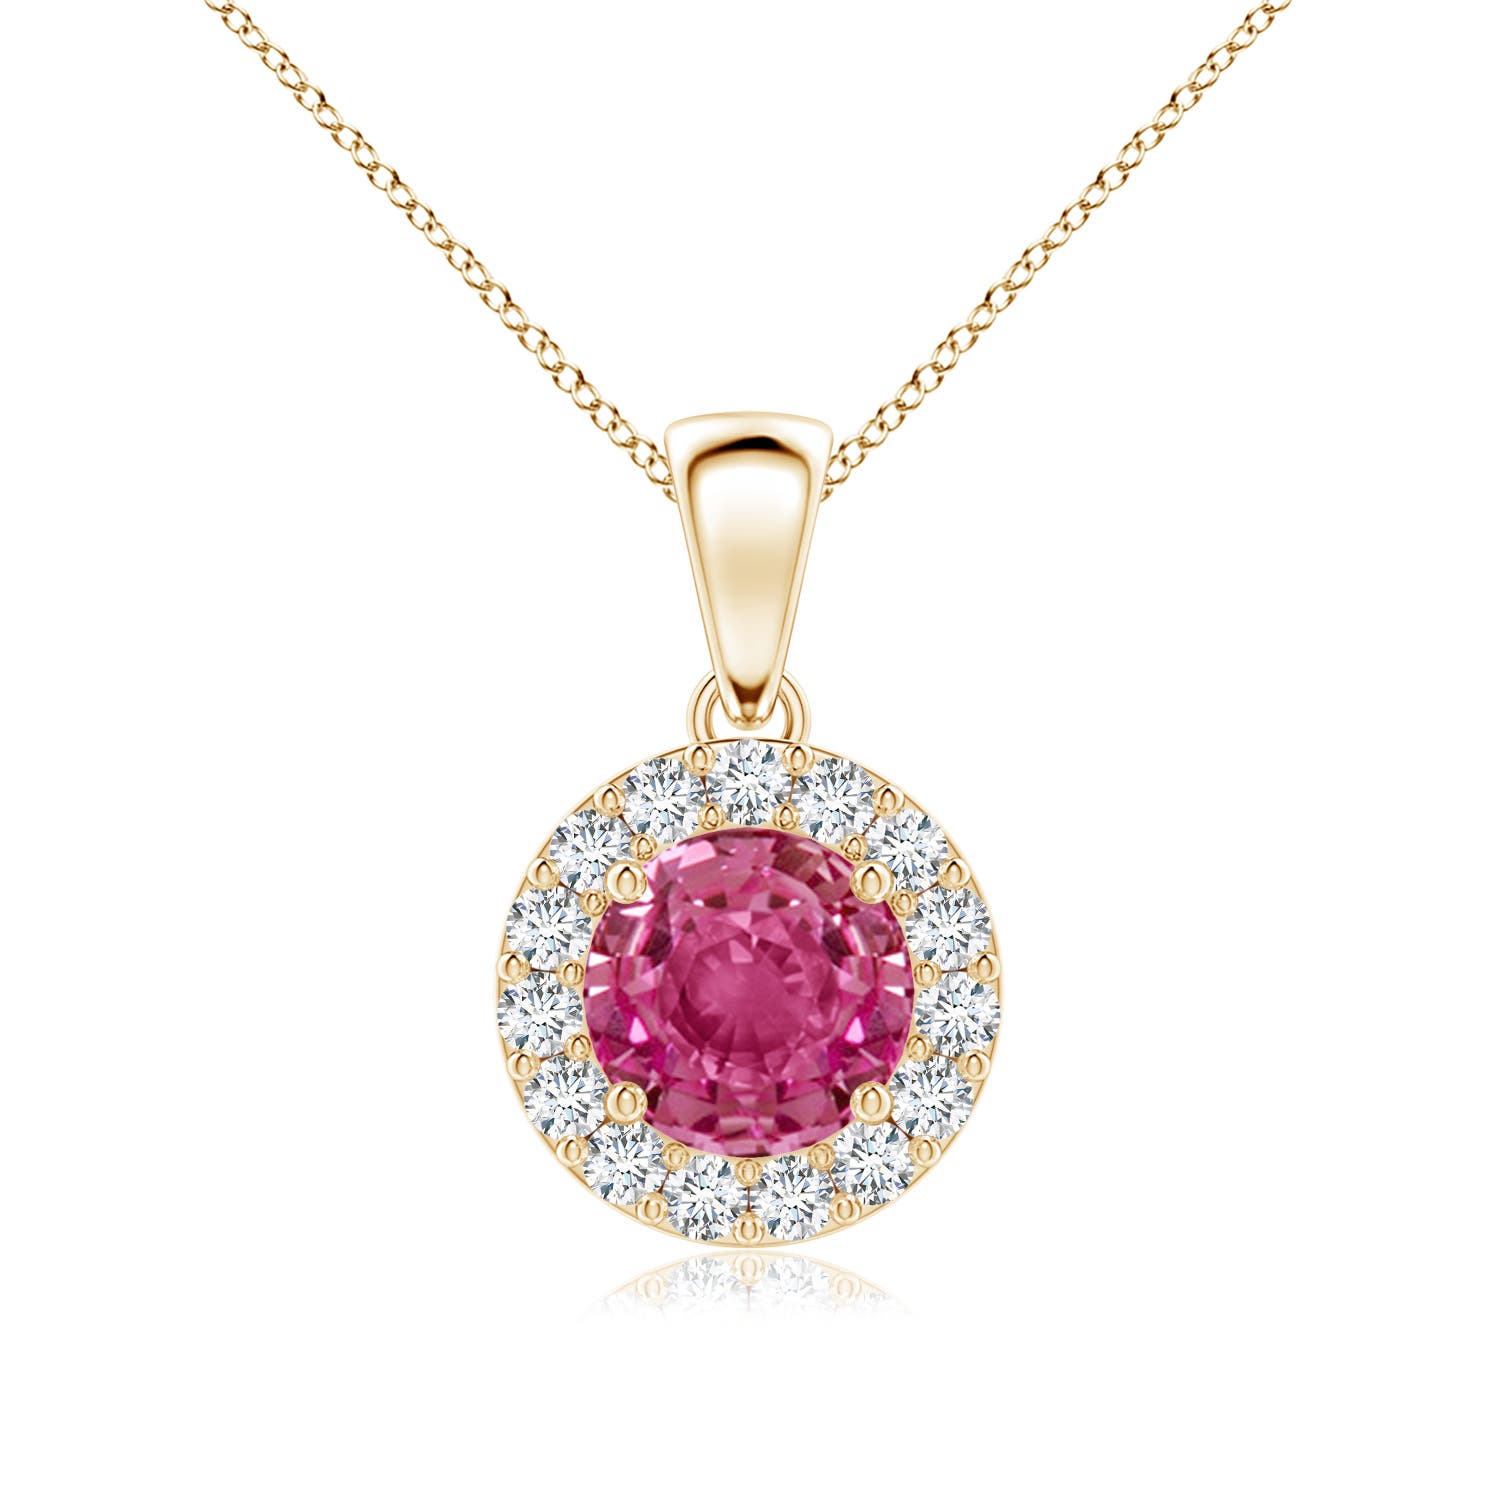 Shop Pink Sapphire Pendant Necklaces for Women | Angara